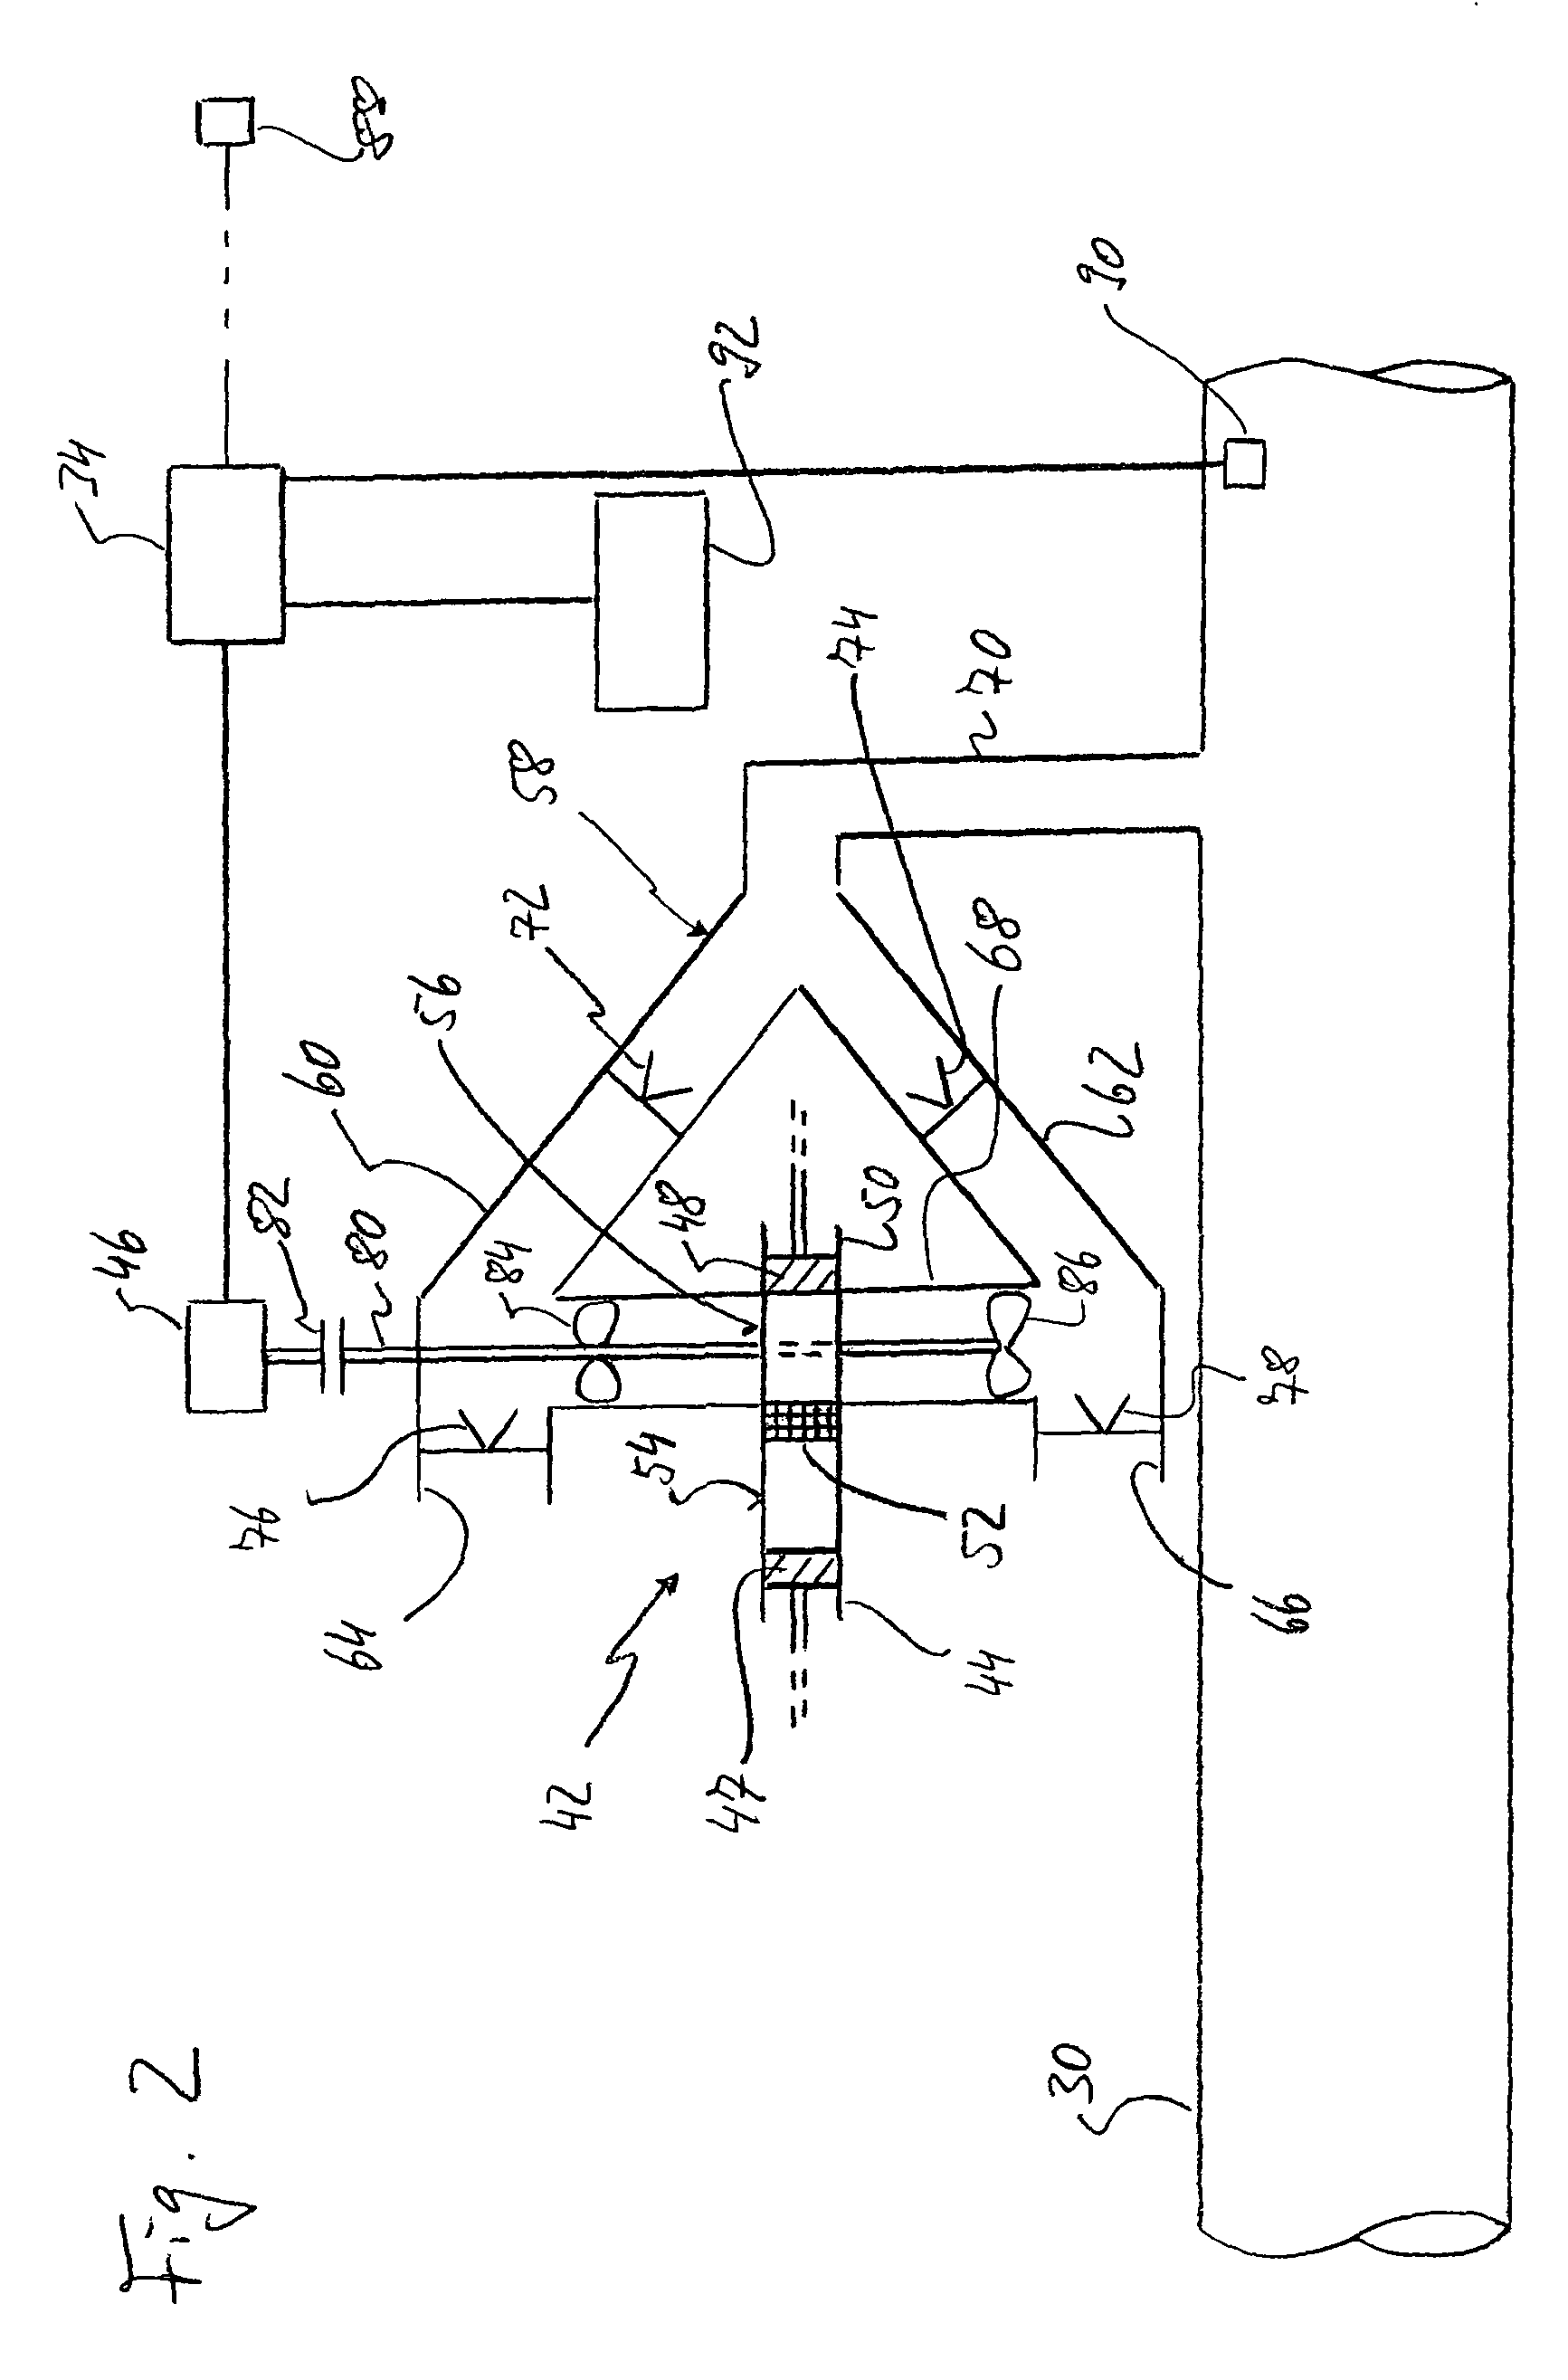 Air conditioning arrangement for an aircraft with a plurality of climate zones that may be individually temperature-controlled